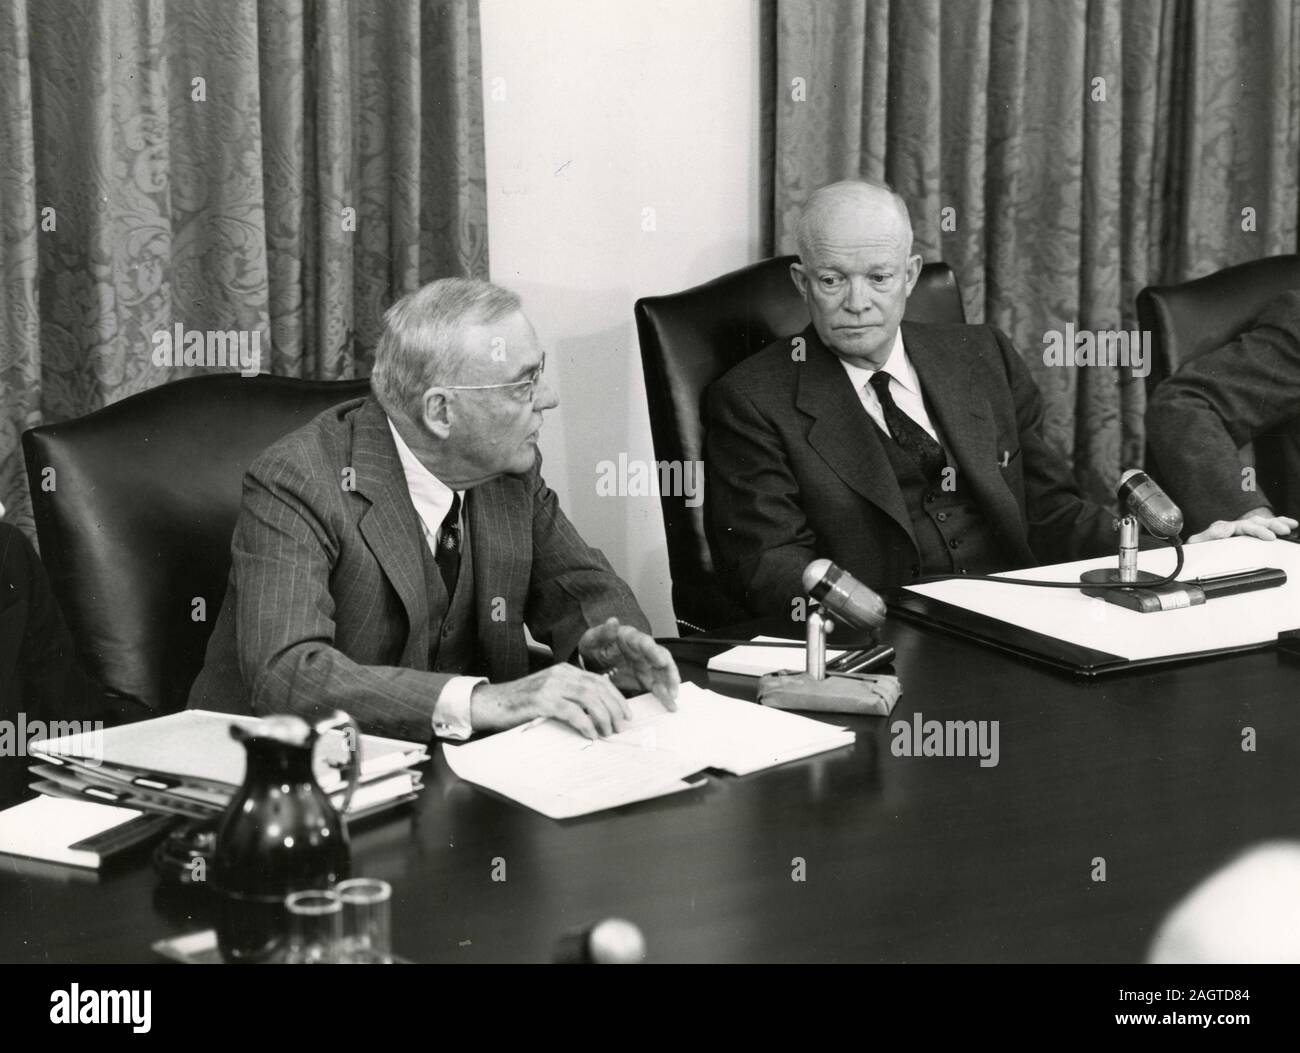 US Secretary of State John Foster Dulles and US President Dwight Eisenhower during a televised cabinet meeting, Washington, DC, USA 1954 Stock Photo